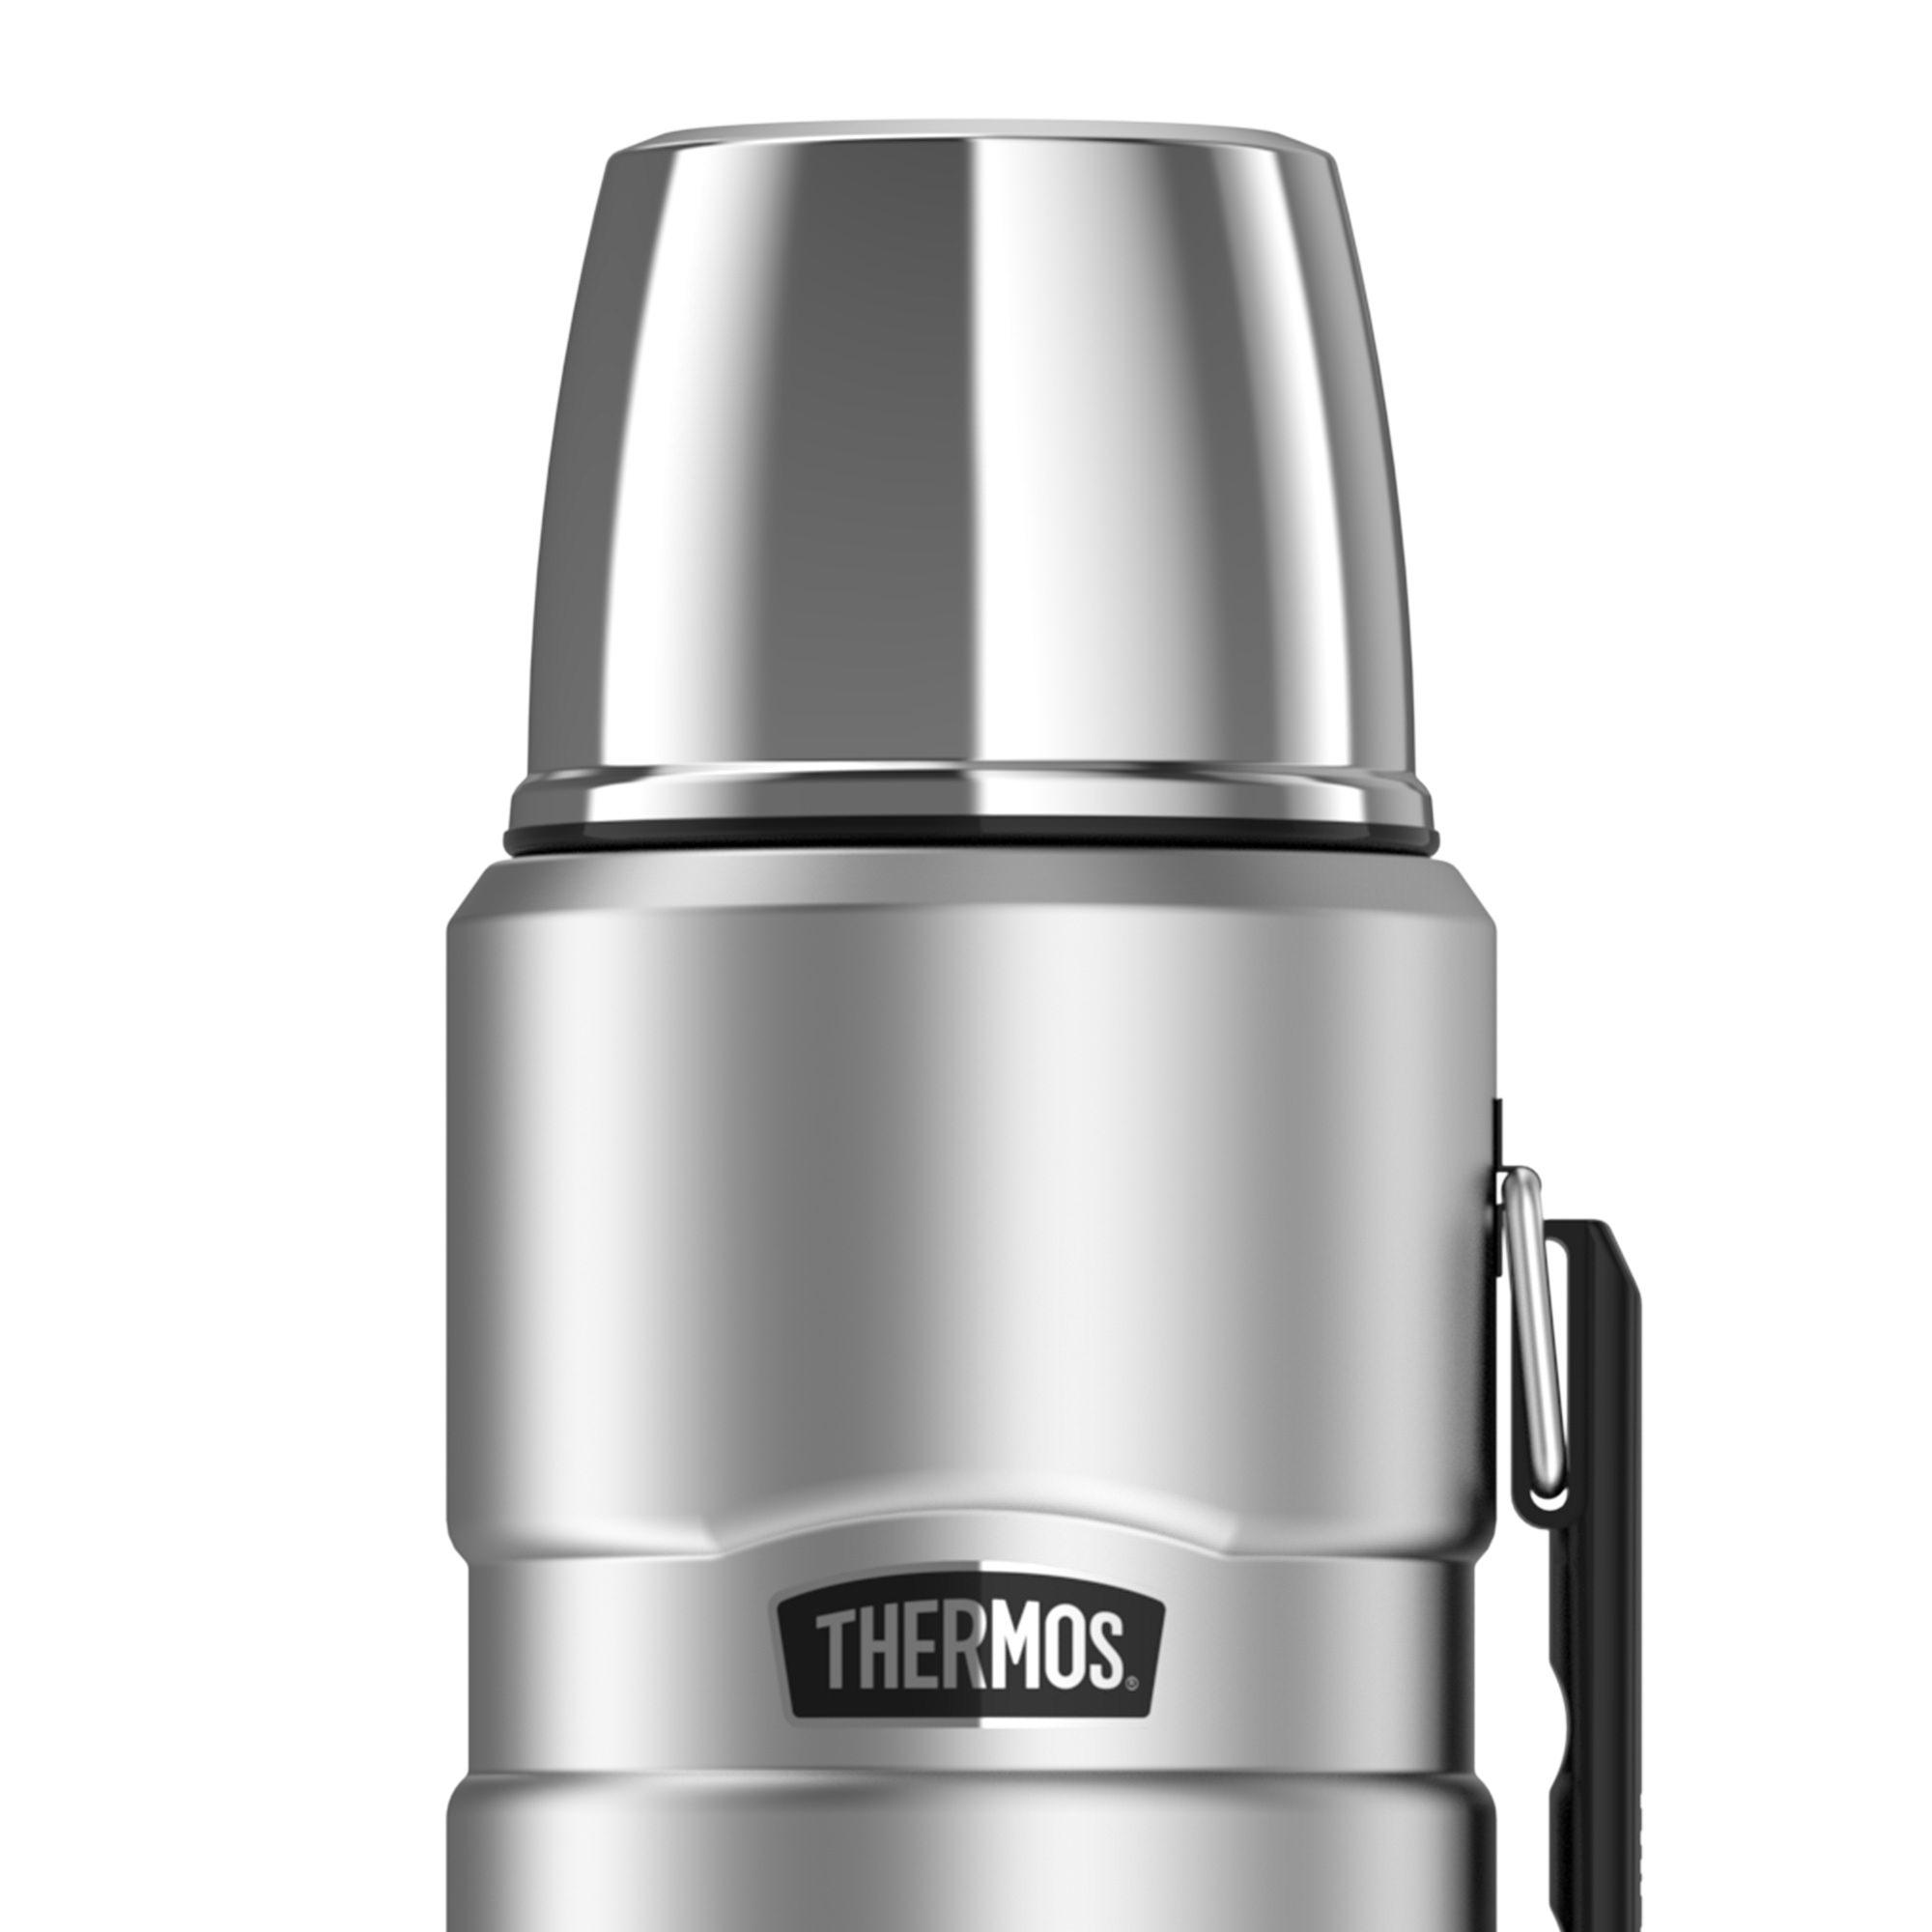 Thermos Stainless King Insulated Flask 2L Stainless Steel Image 2